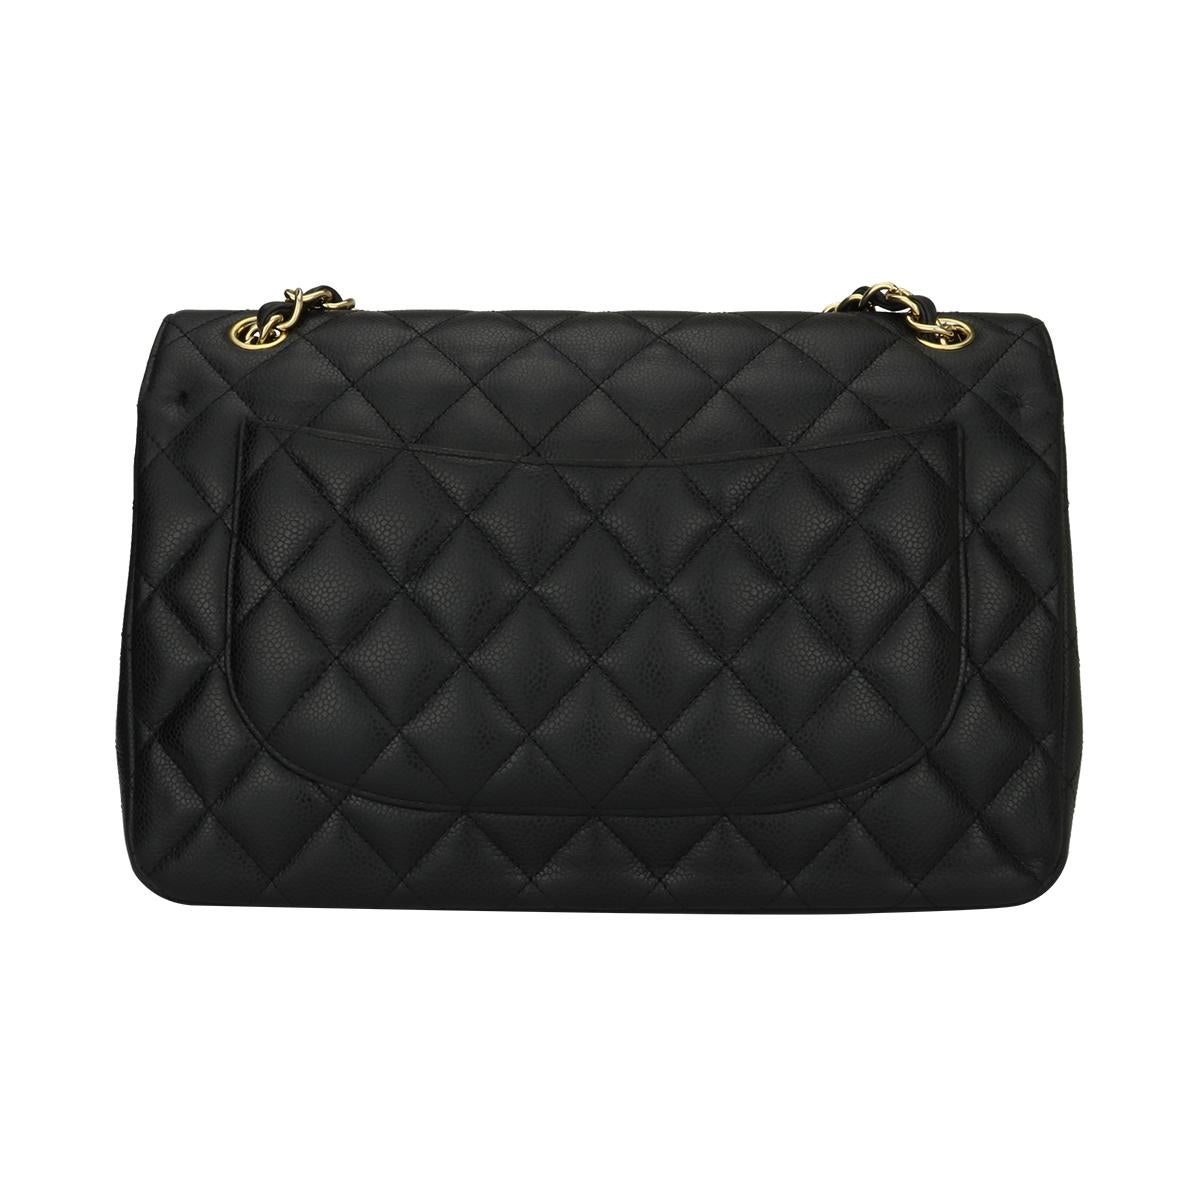 Women's or Men's CHANEL Classic Jumbo Double Flap Black Caviar with Gold Hardware 2014